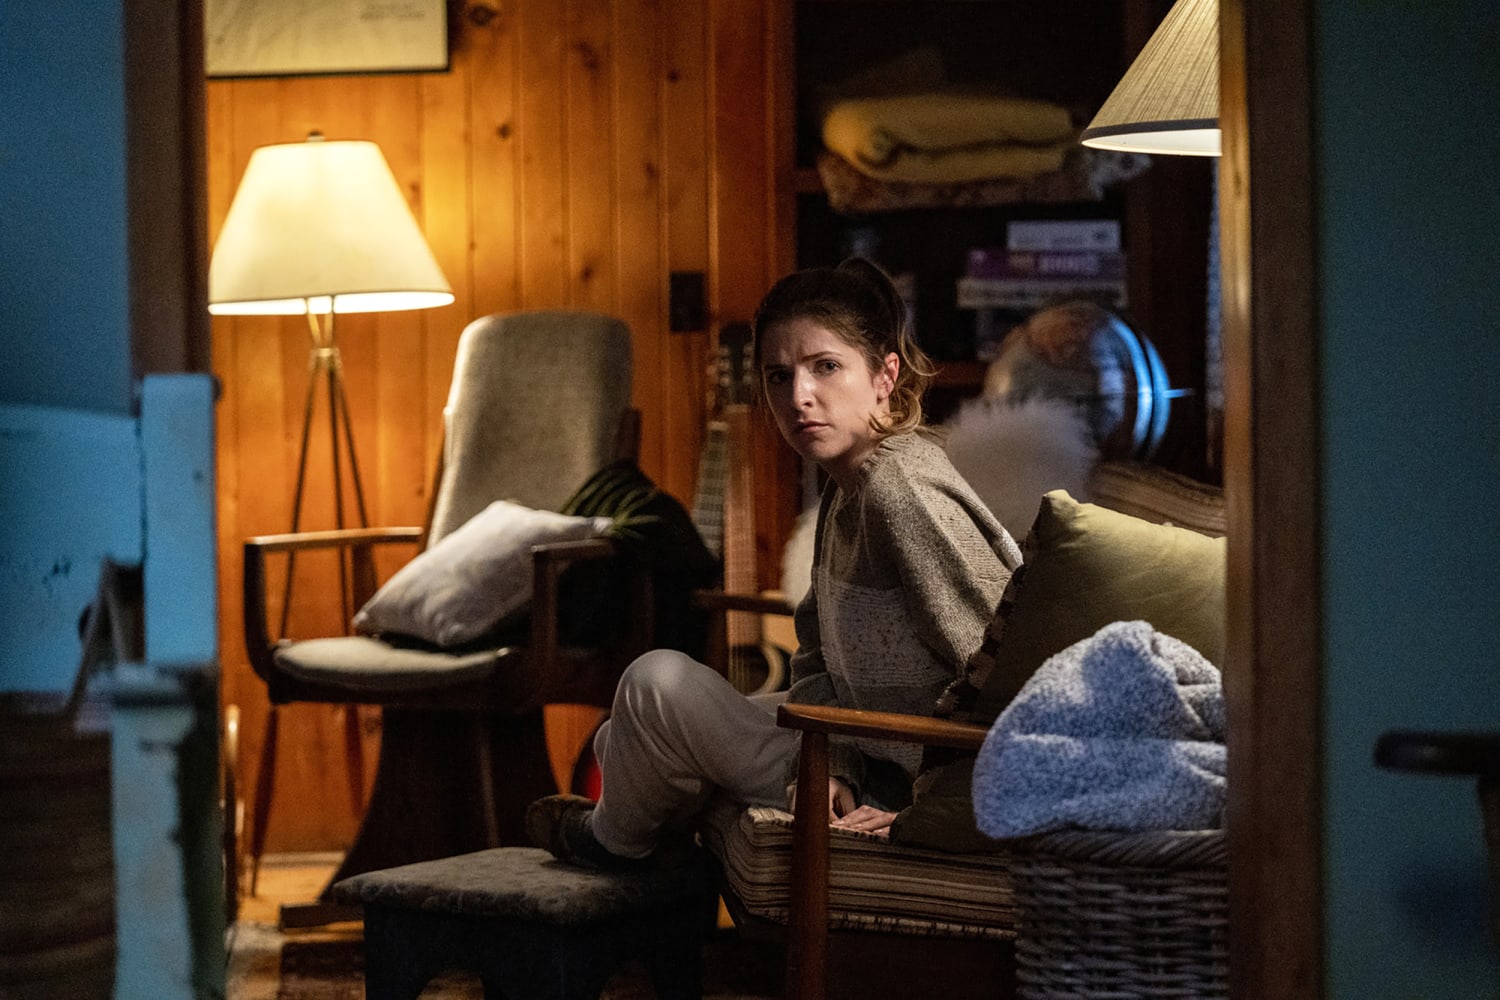 Alice, Darling starring Anna Kendrick is a different kind of thriller